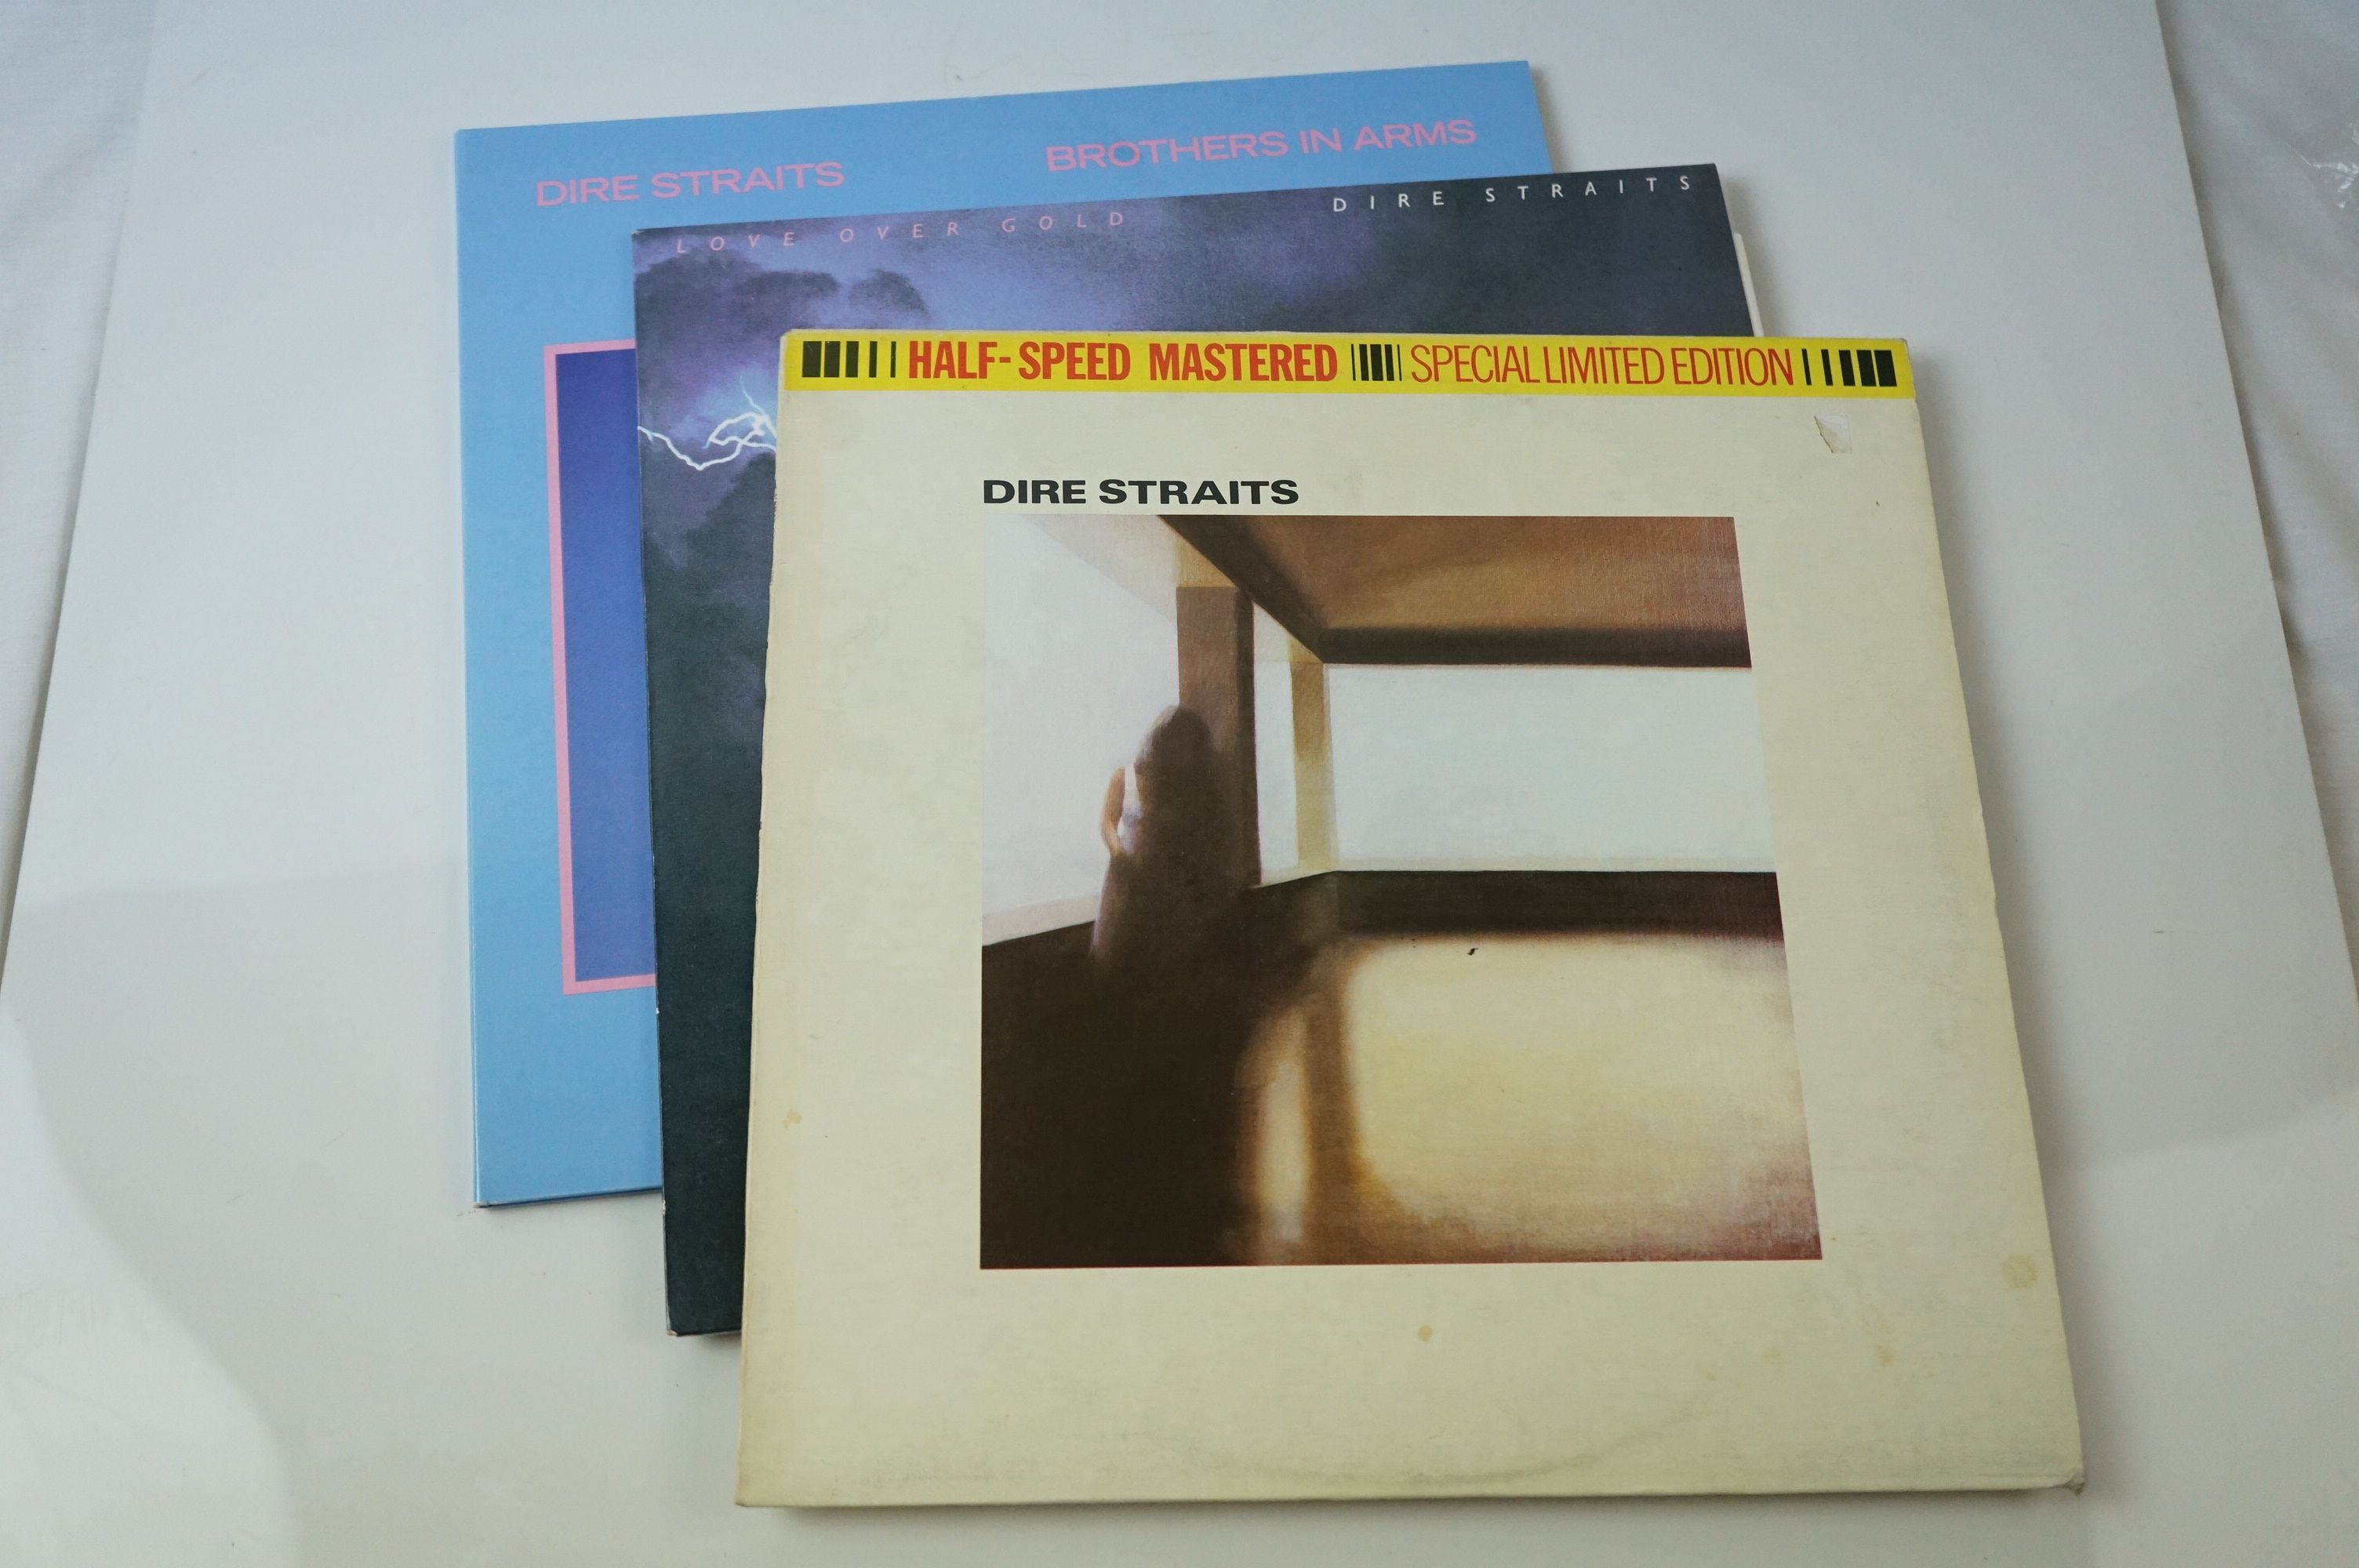 Vinyl - Dire Straits 3 LP's to include Brothers In Arms (Warner Bros 49377-1) Love Over Gold (